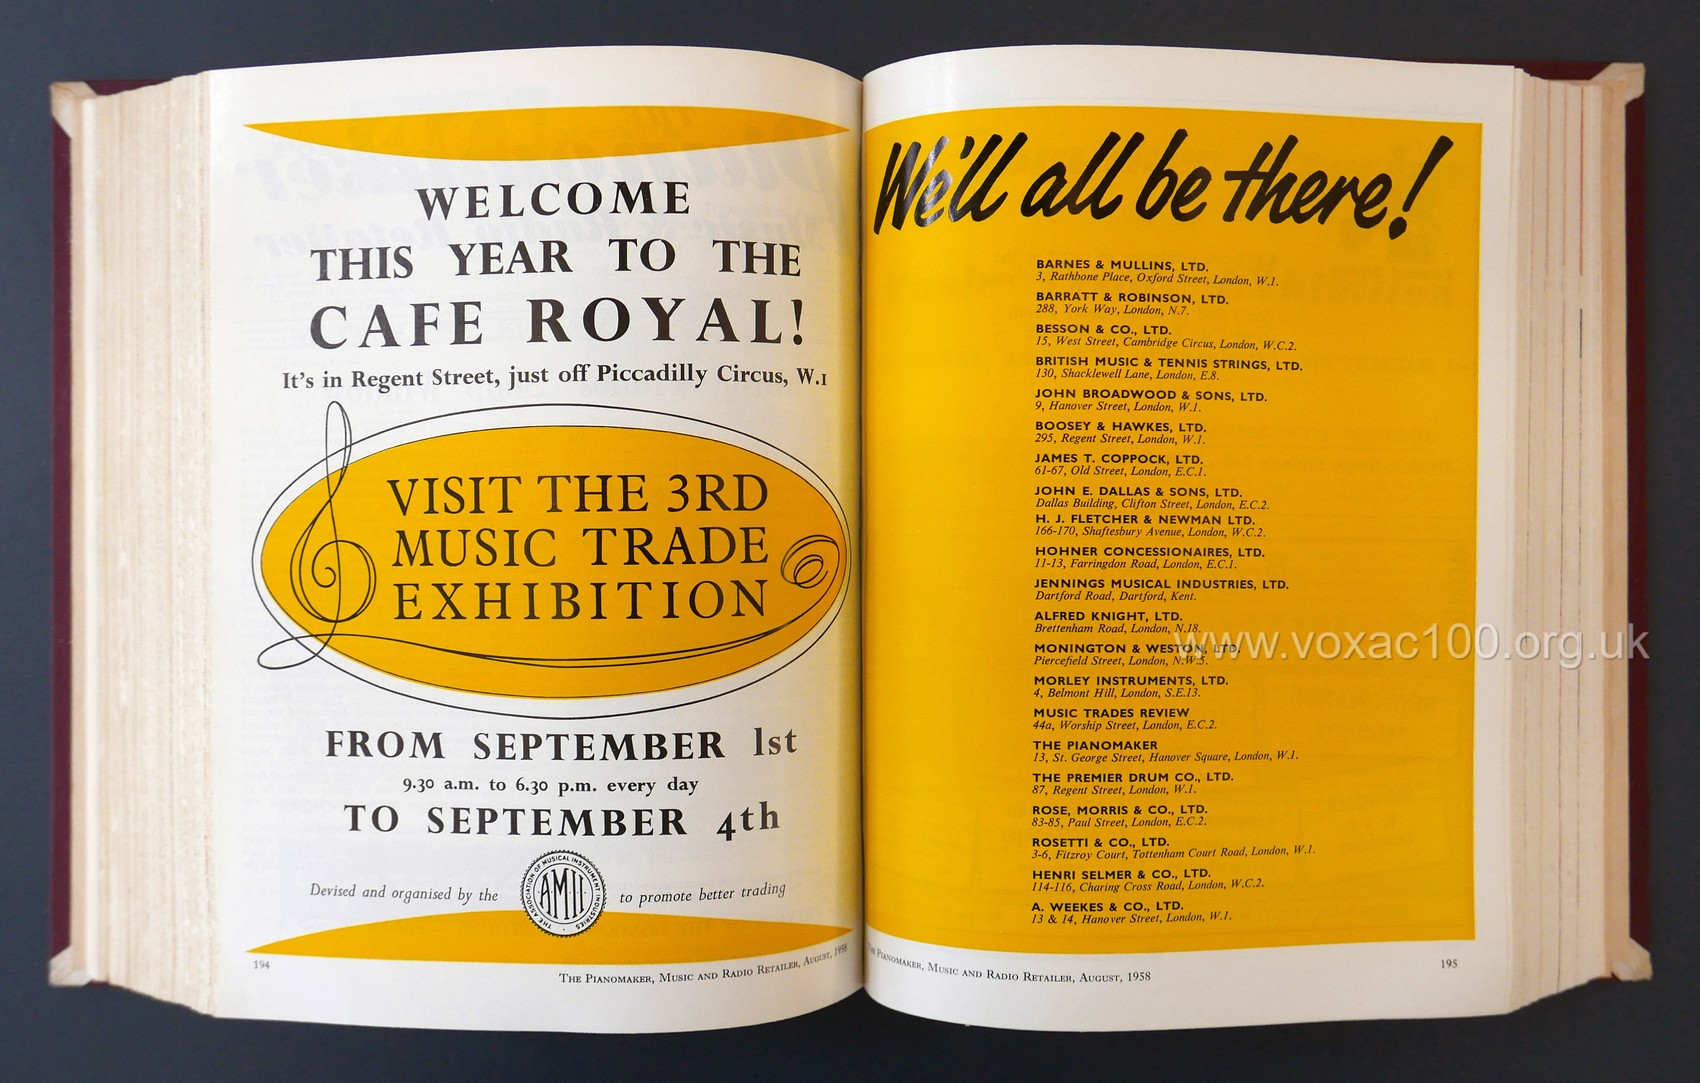 Double page spread for The AMII Trade Fair, Cafe Royal, September 1958